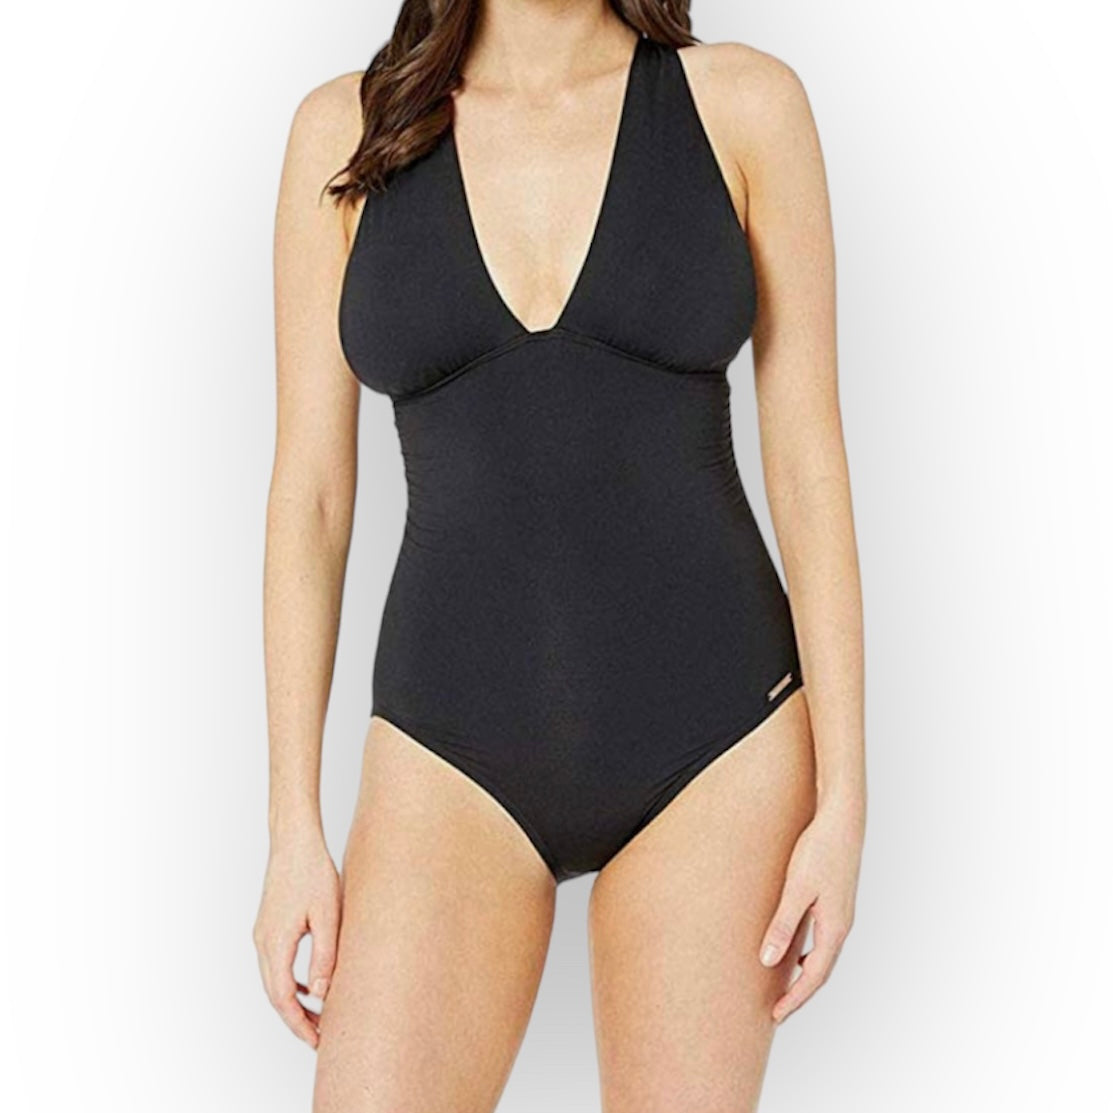 Black High-Neck Convertible Ruched One-Piece Swimsuit Women's Swimwear